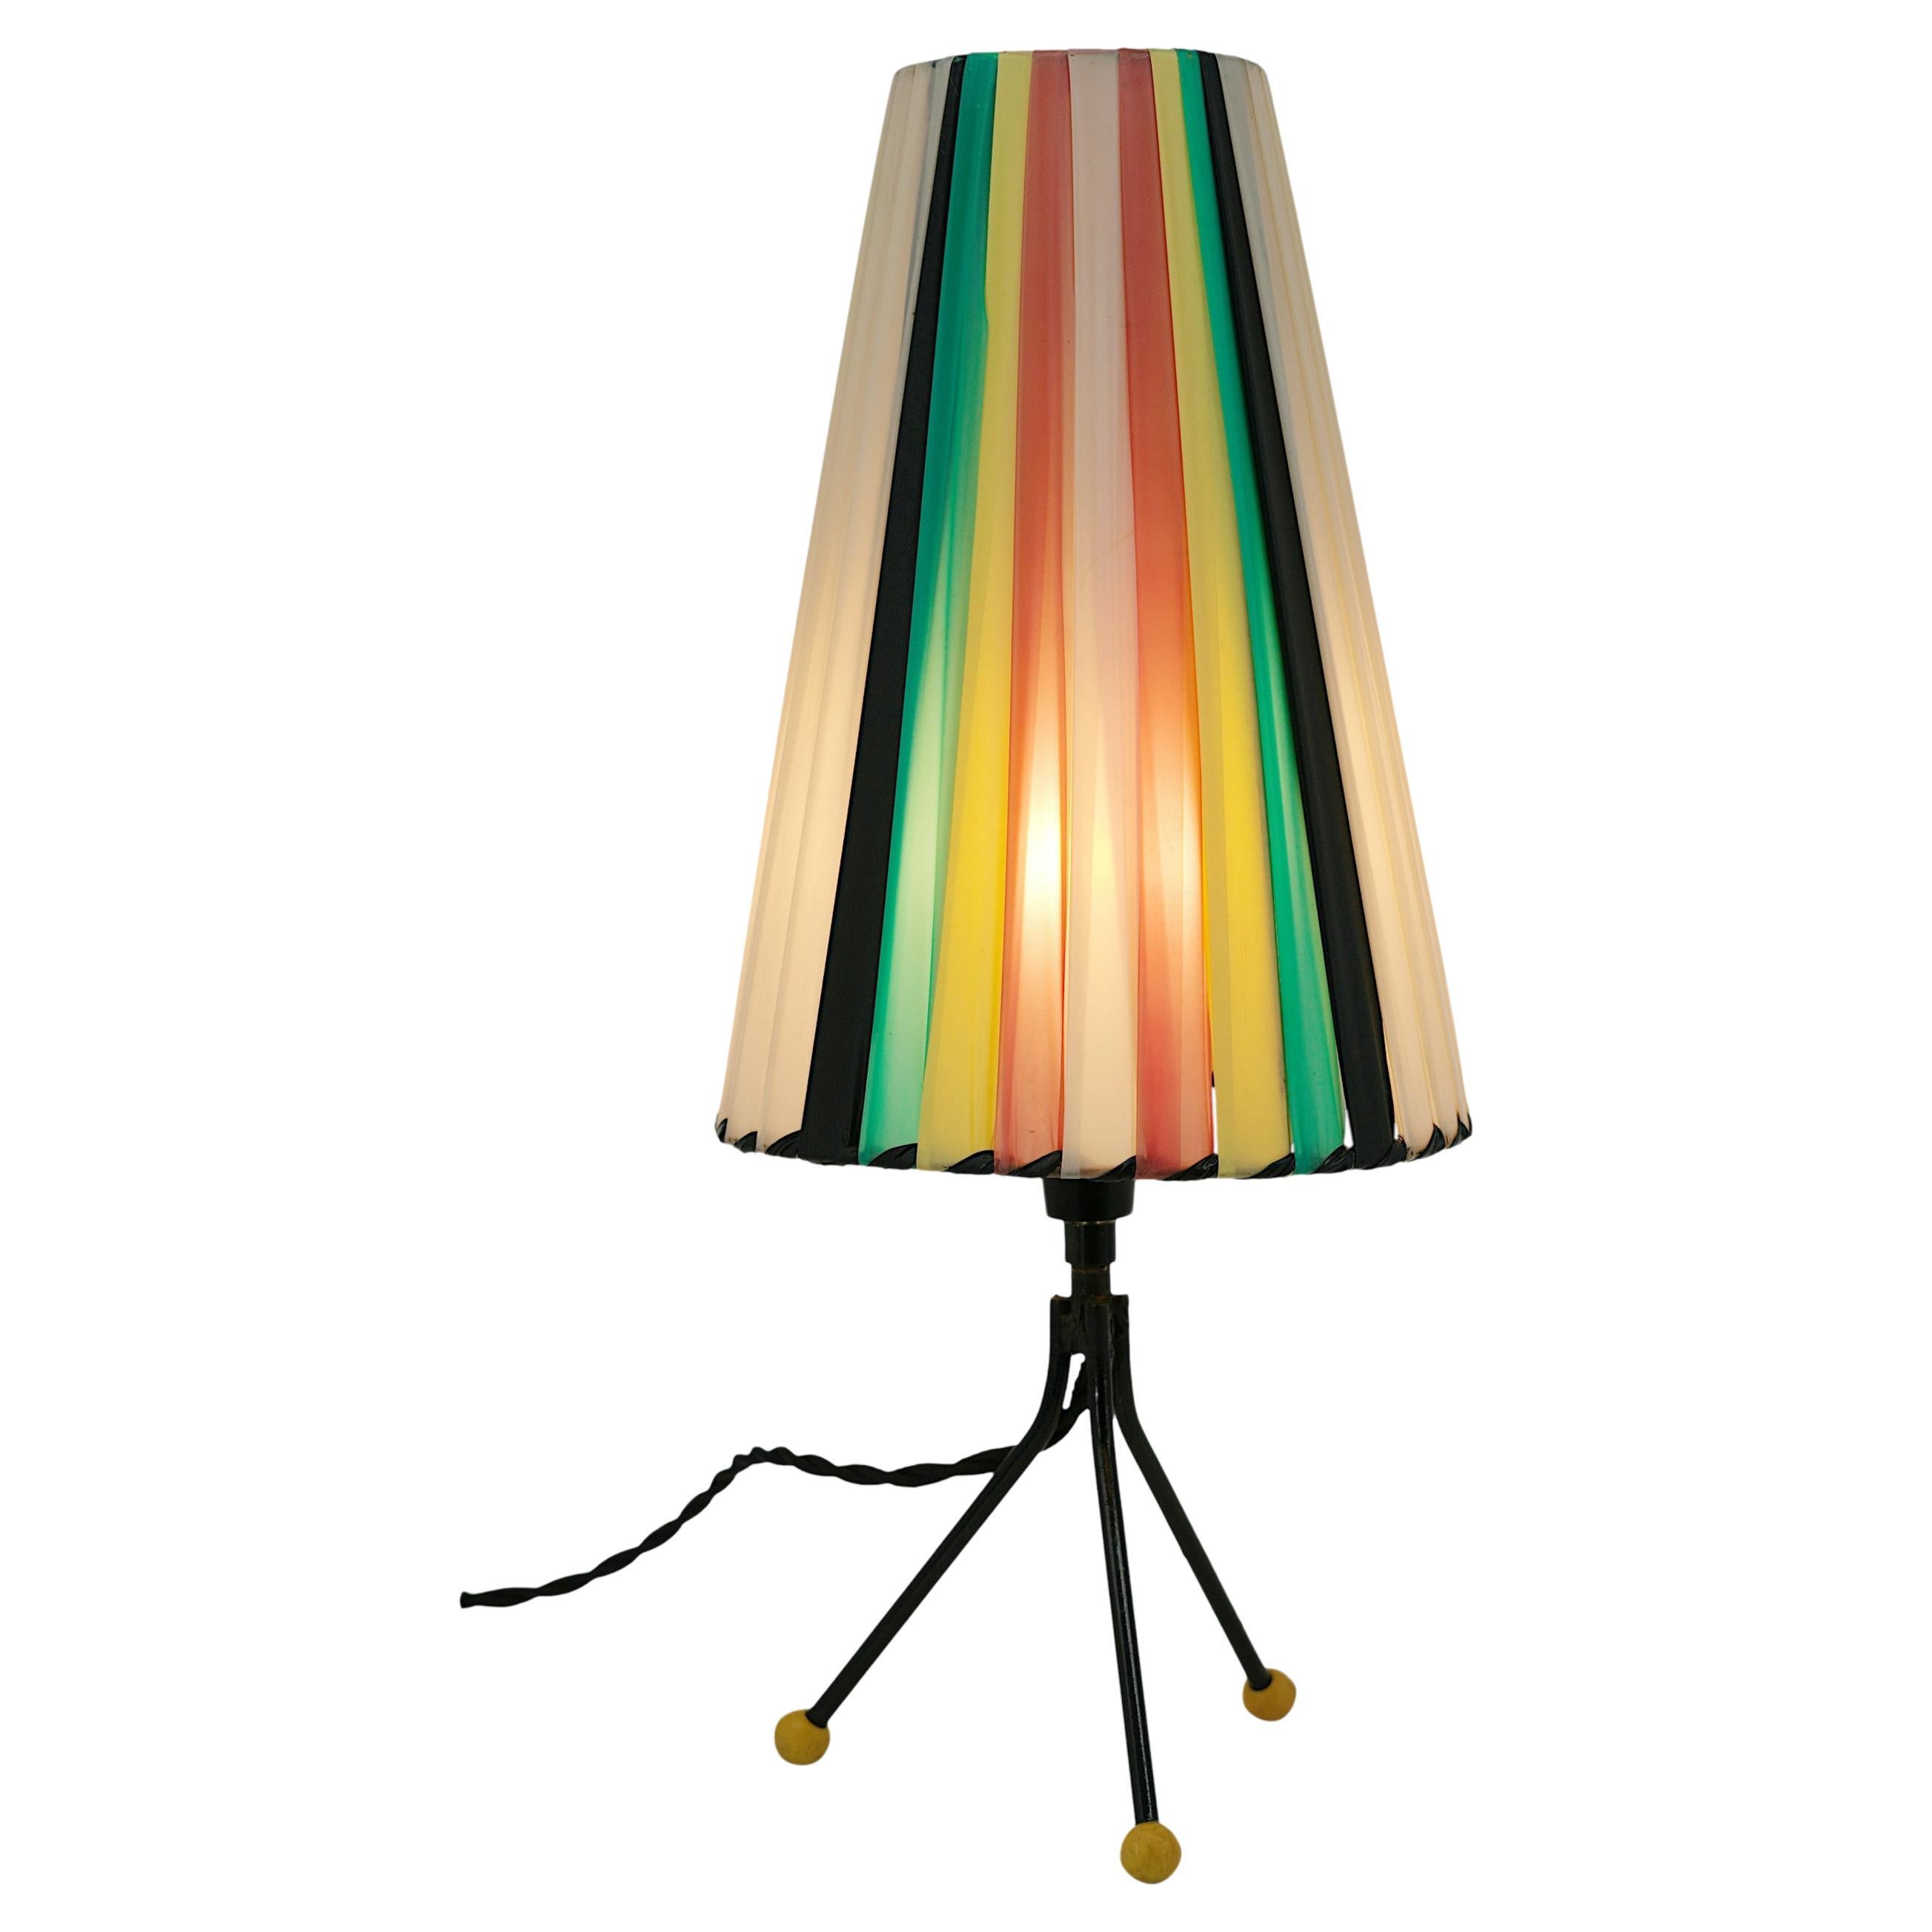 French Mid-century Tripod Table Lamp, 1950s